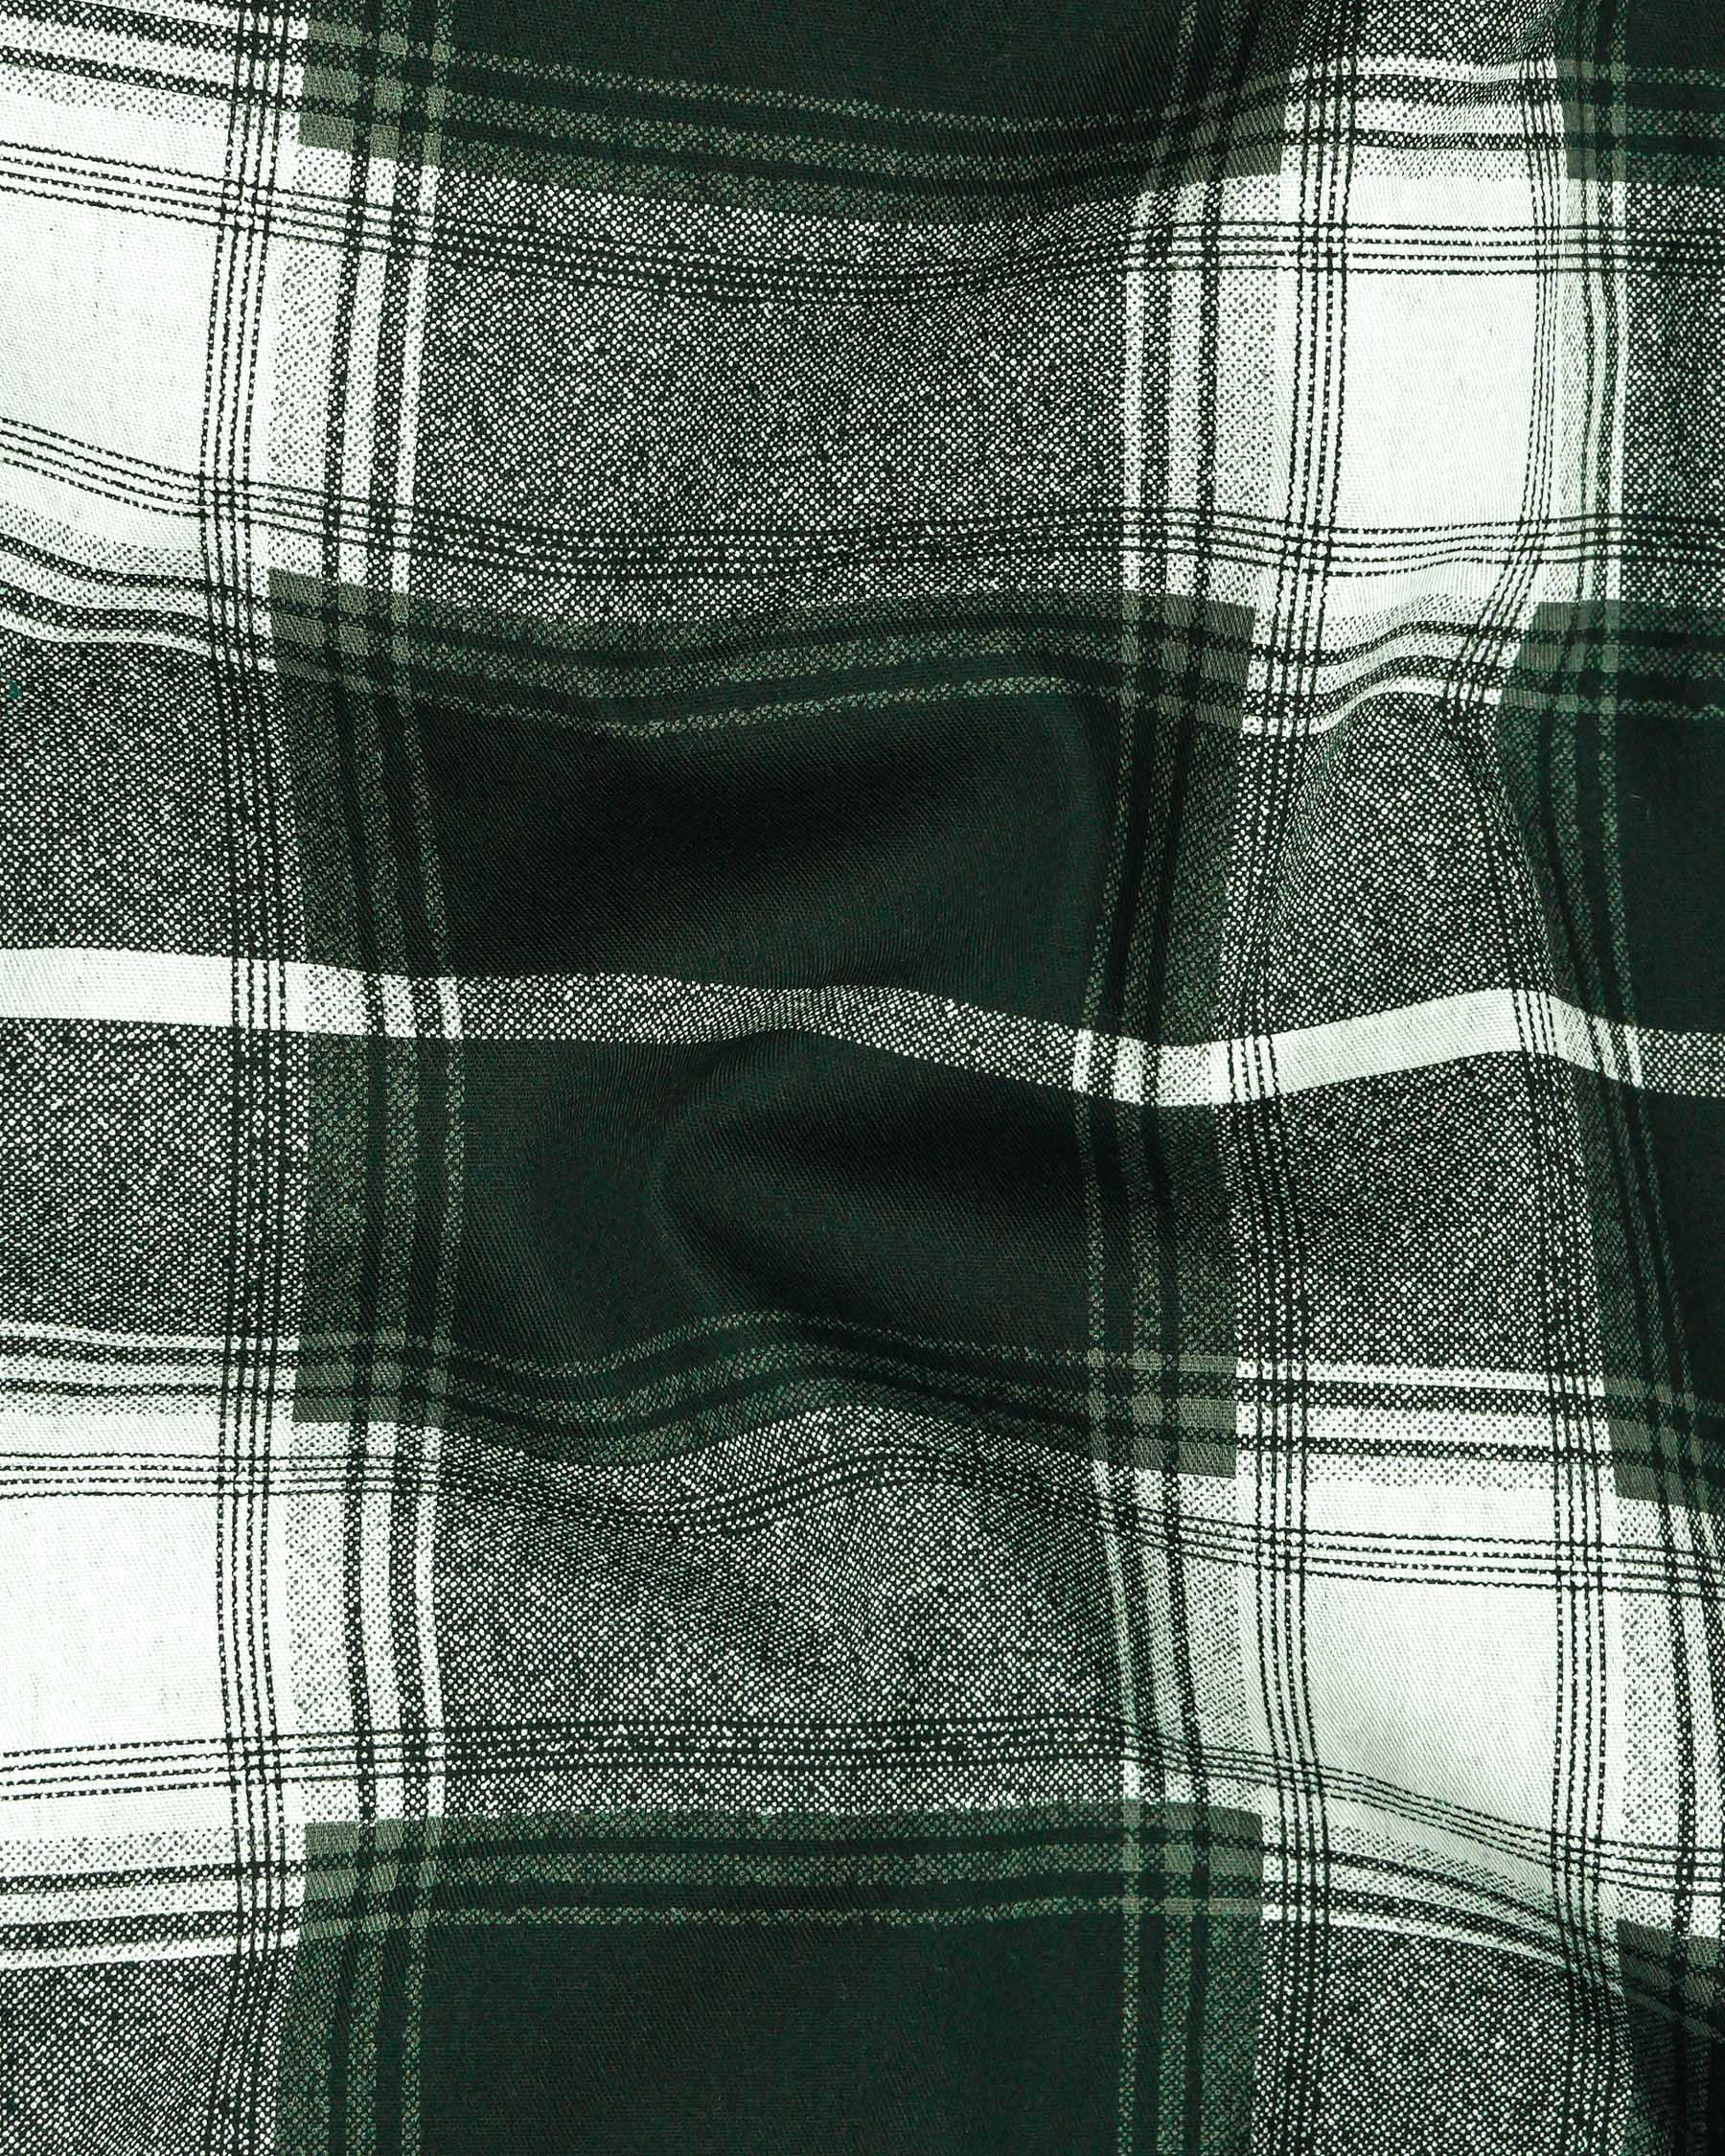 Timber Green with Bright White Twill Plaid Premium Cotton Shirt  7467-38, 7467-H-38, 7467-39, 7467-H-39, 7467-40, 7467-H-40, 7467-42, 7467-H-42, 7467-44, 7467-H-44, 7467-46, 7467-H-46, 7467-48, 7467-H-48, 7467-50, 7467-H-50, 7467-52, 7467-H-52